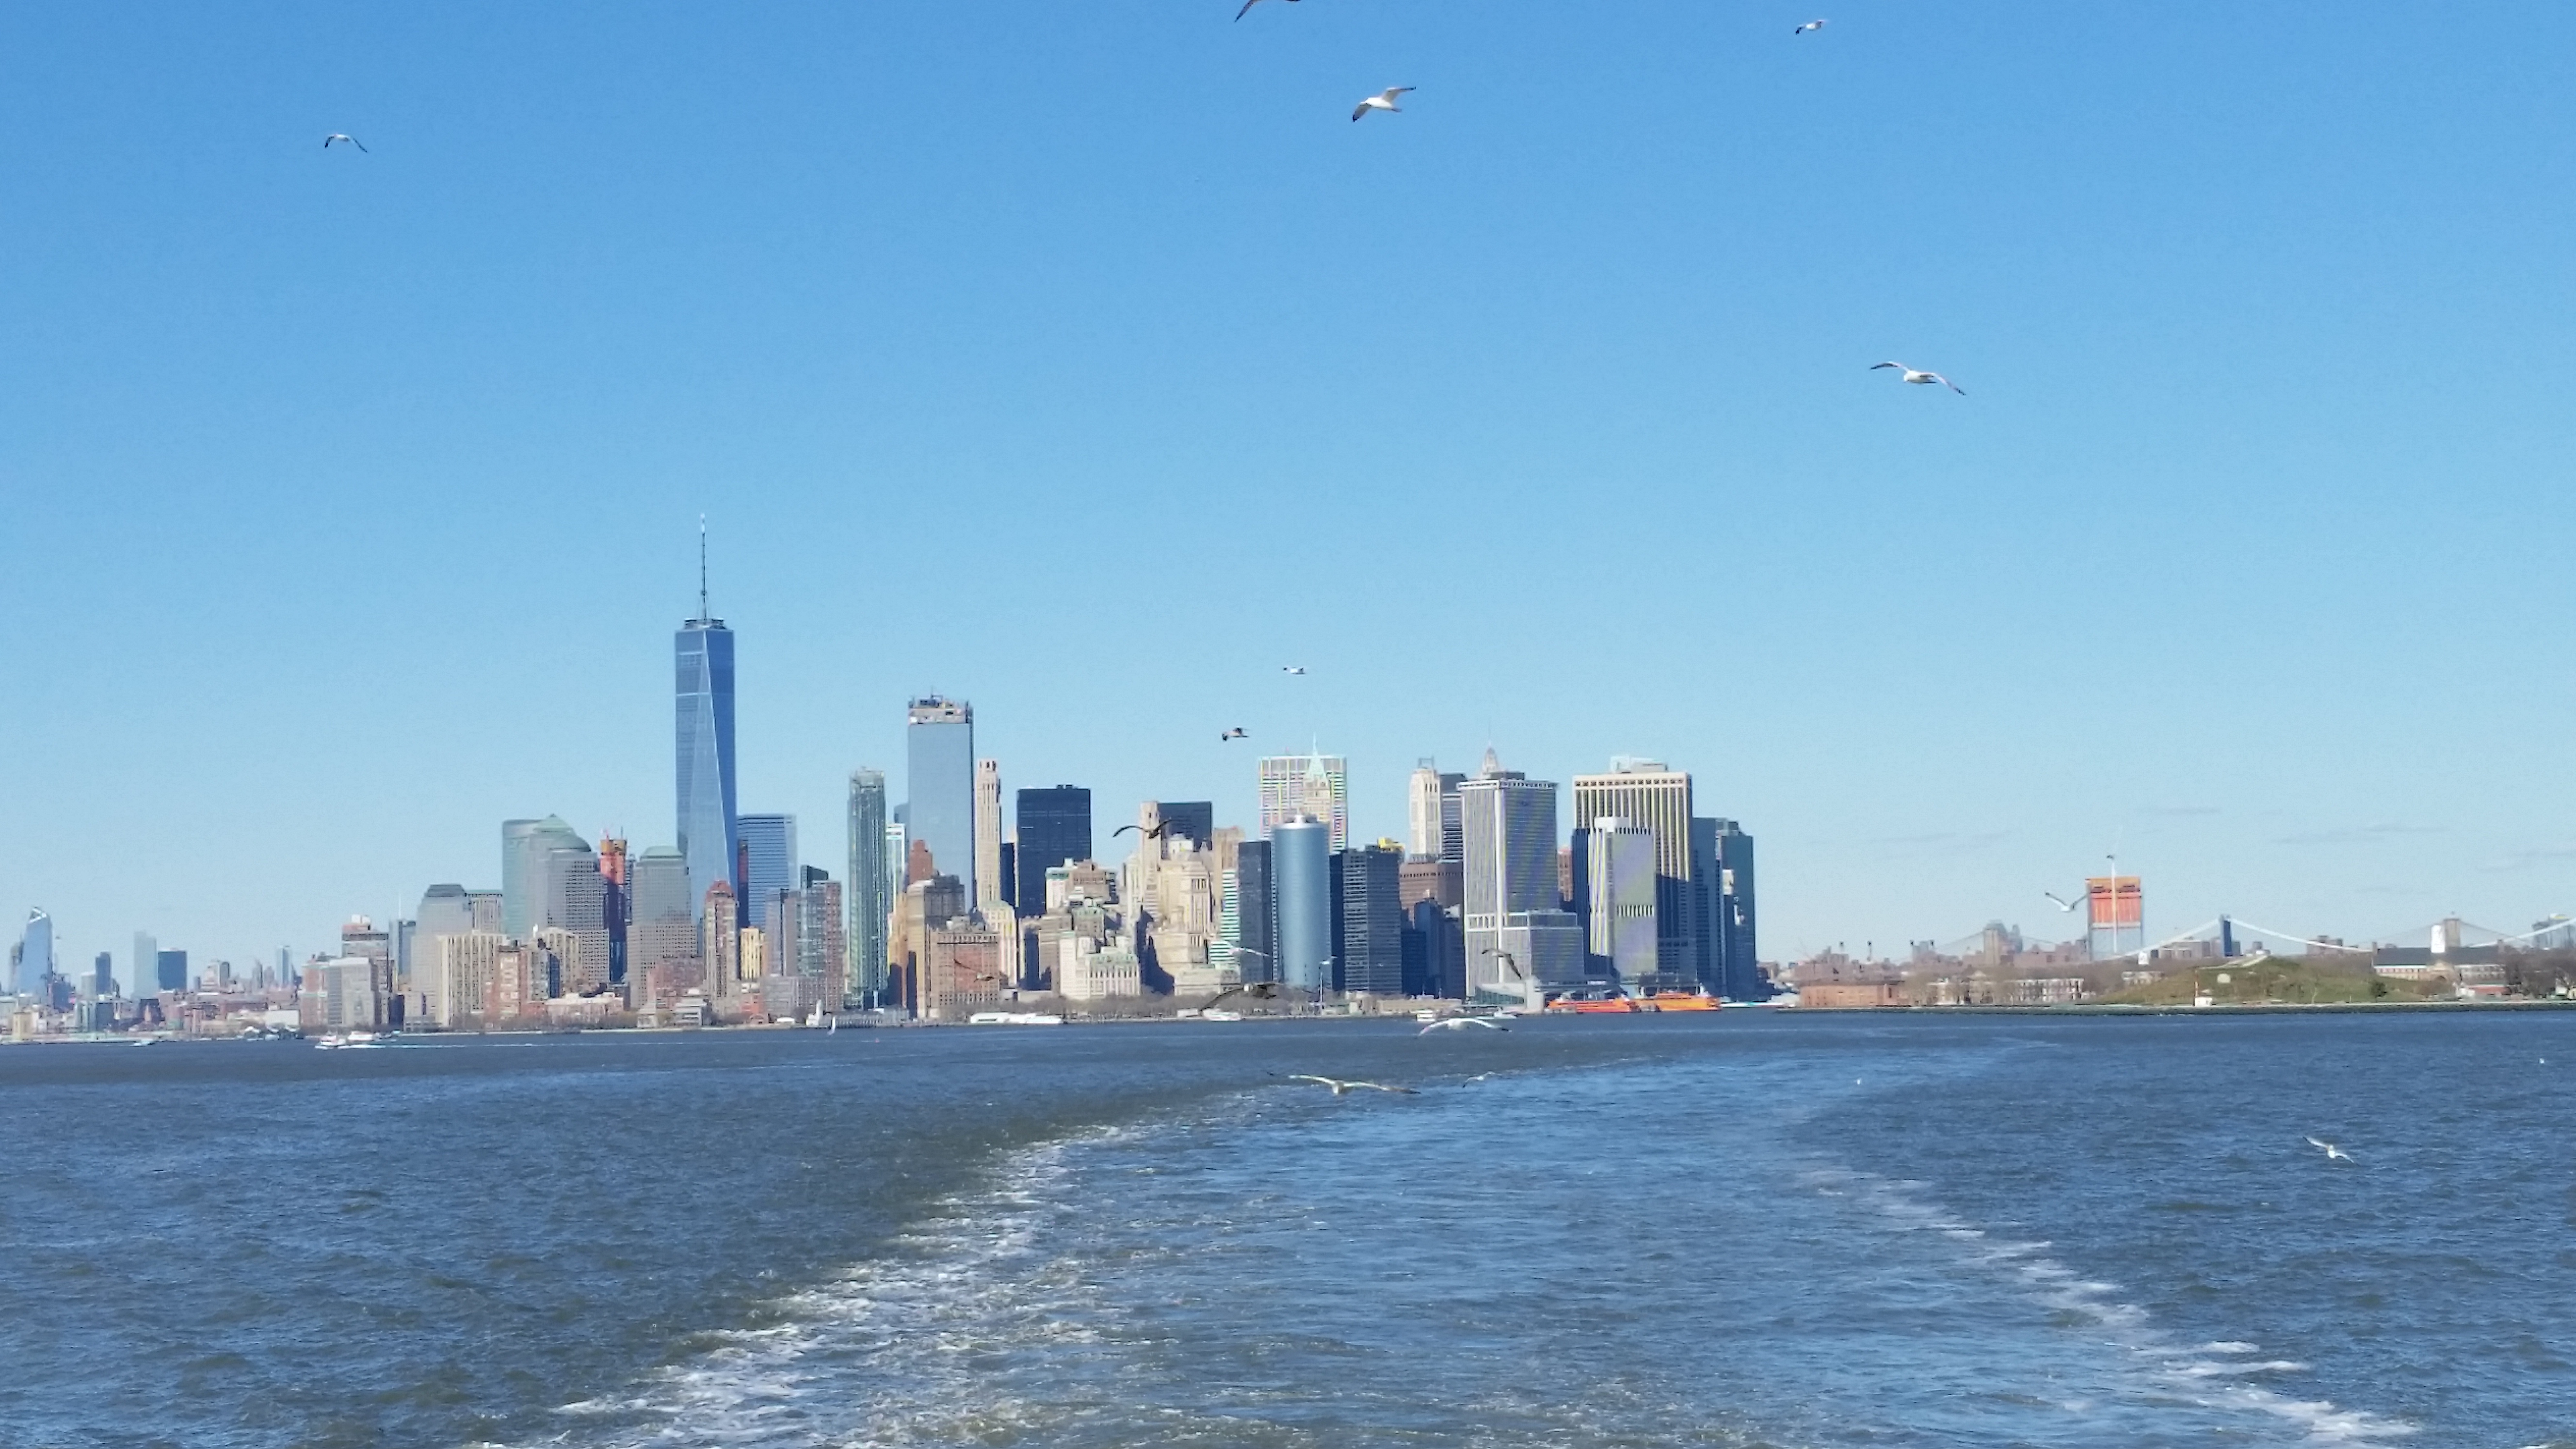 NYC skyline from the Staten Island Ferry. We were living abroad at the time (2017)